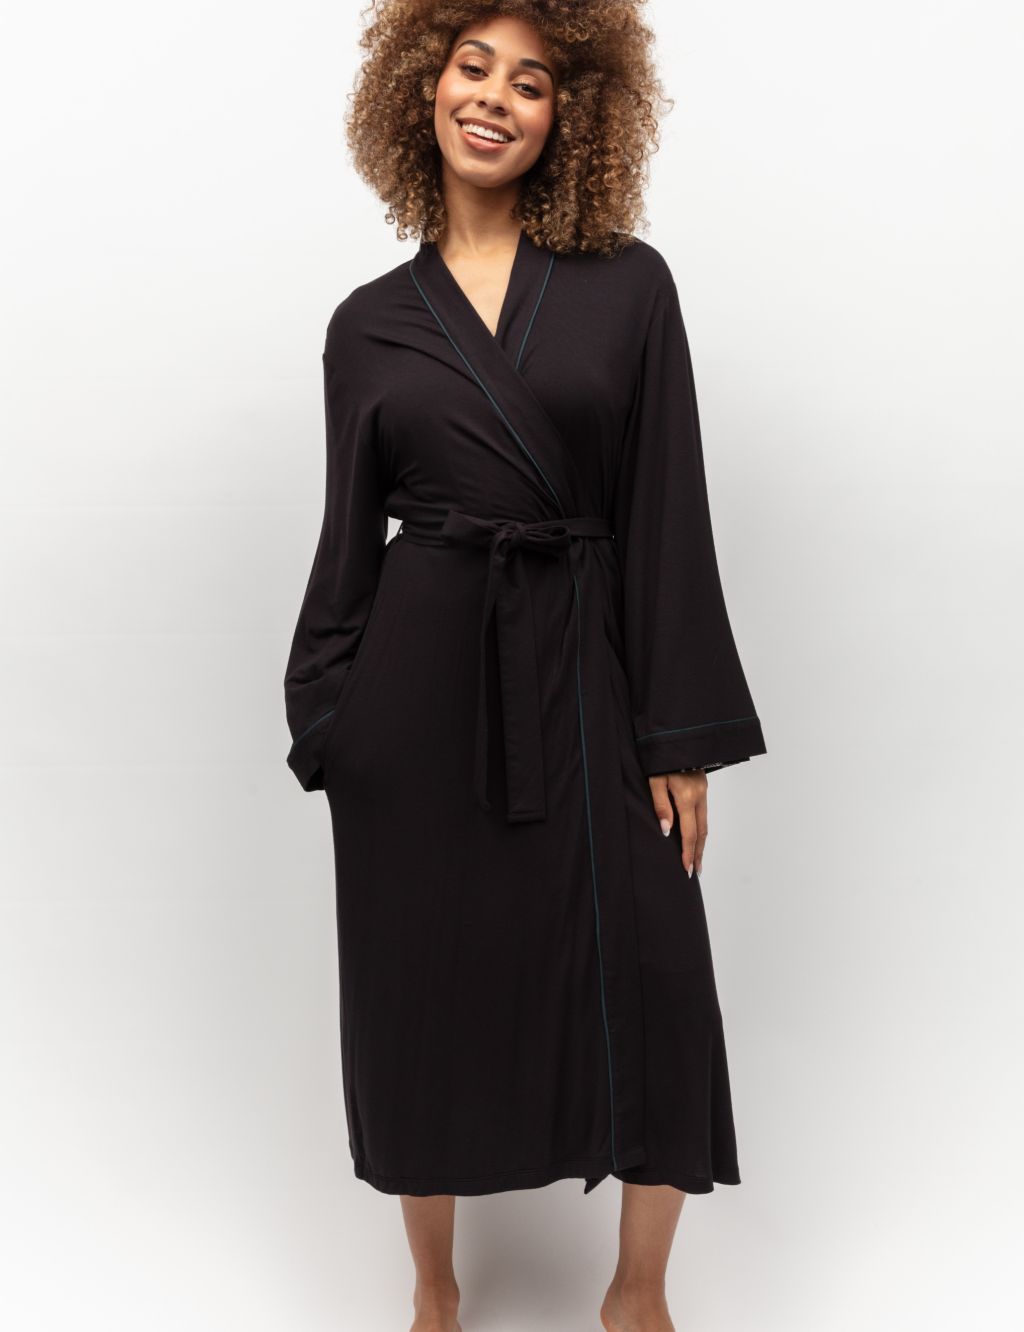 Jersey Dressing Gown image 1